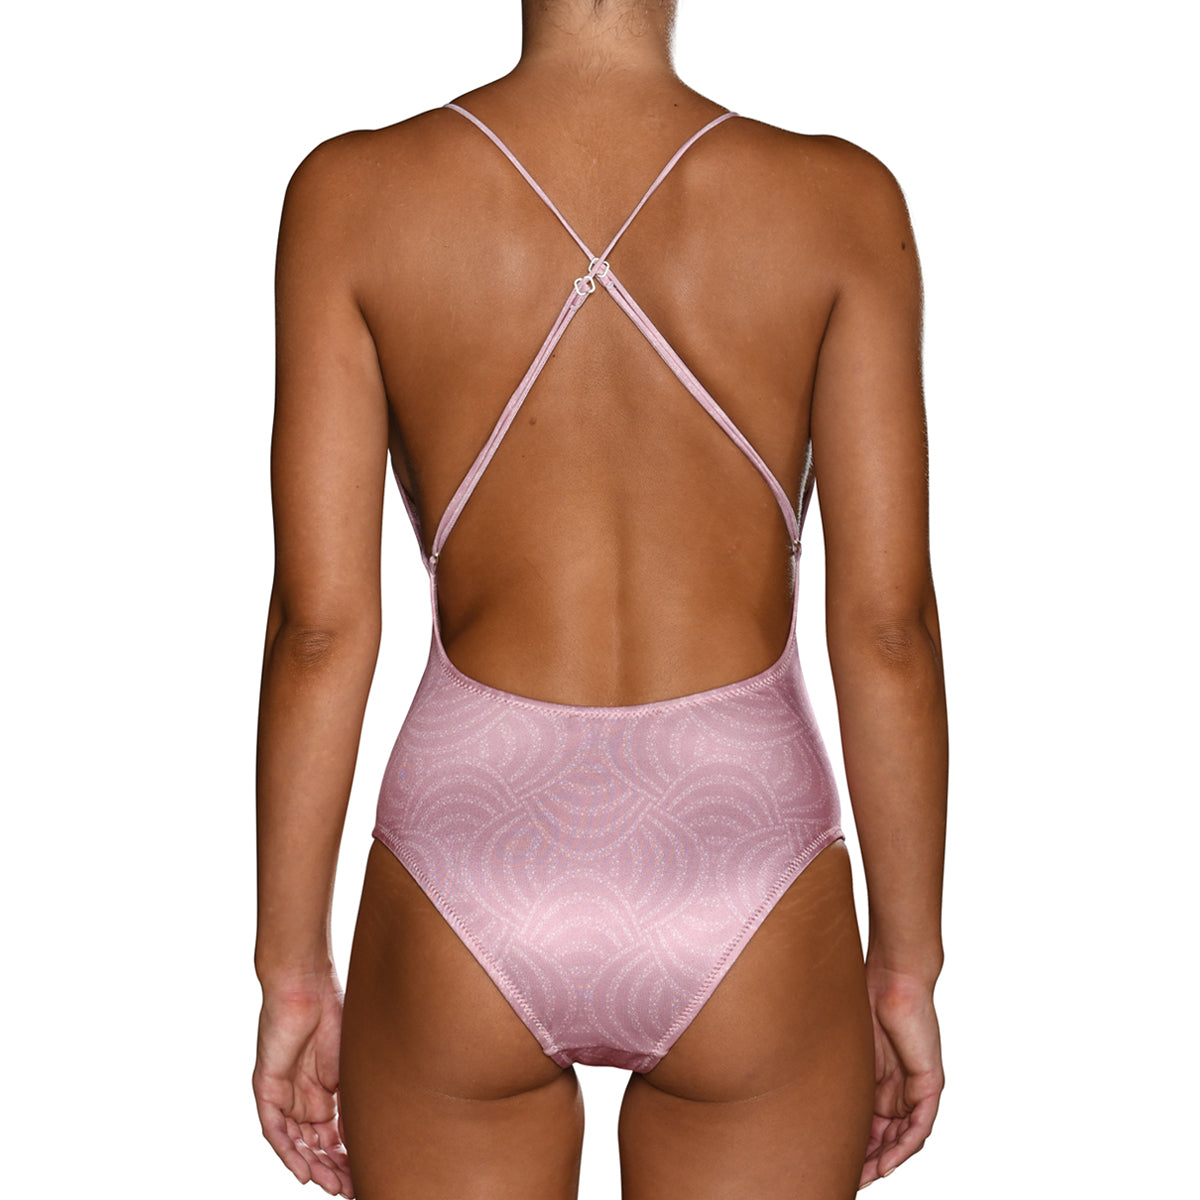 Dusty Pink Pearls Halter Swimsuit